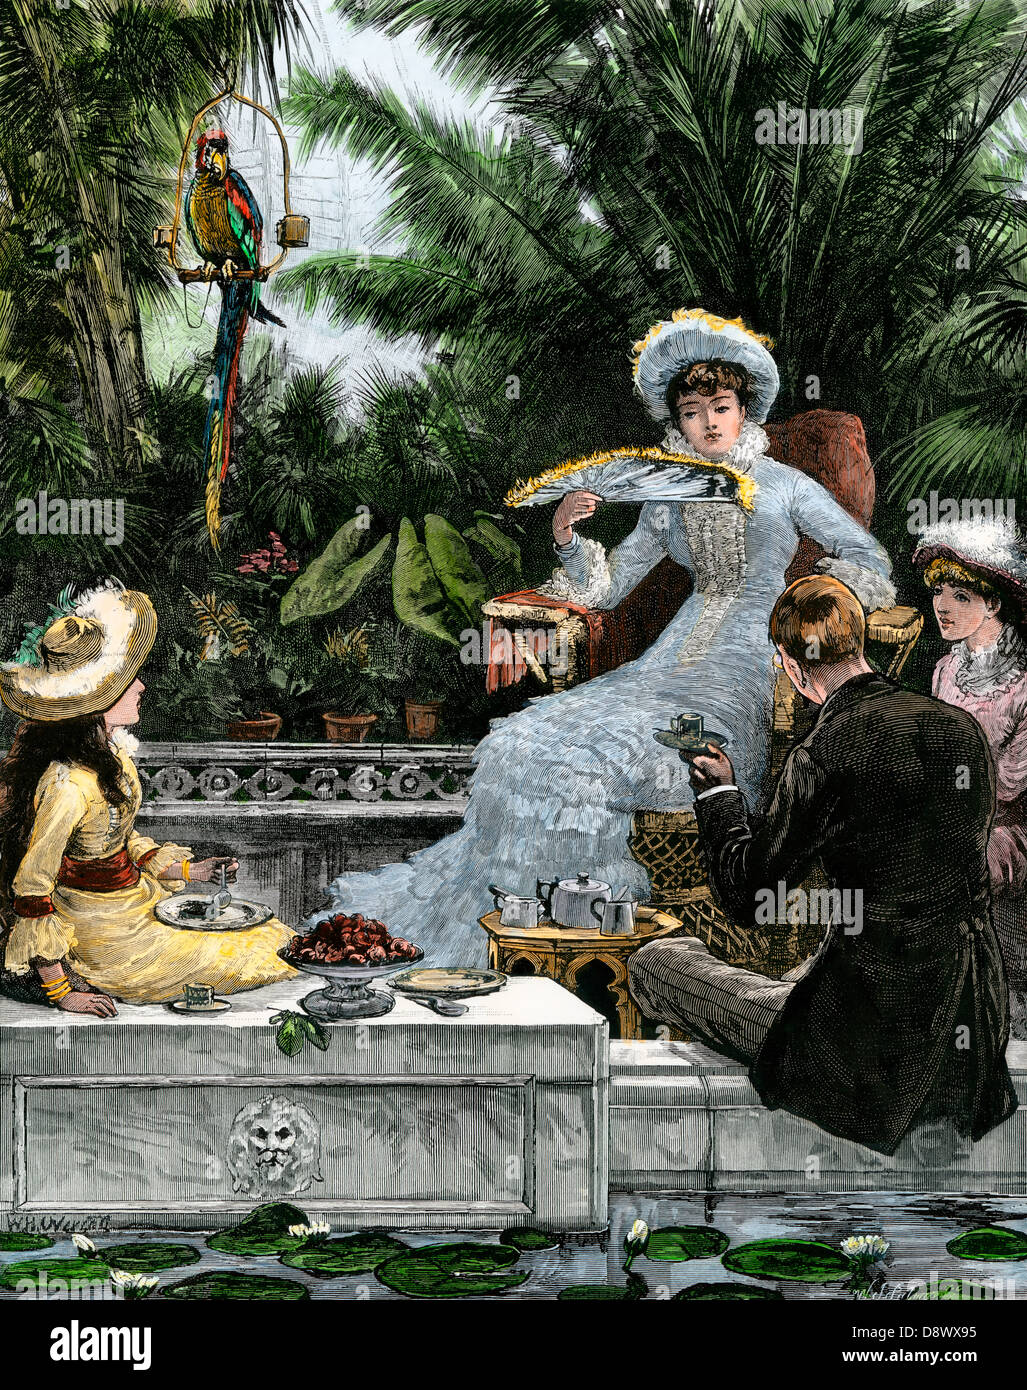 Upperclass family enjoying afternoon tea in a hothouse, England, 1880s. Hand-colored woodcut Stock Photo